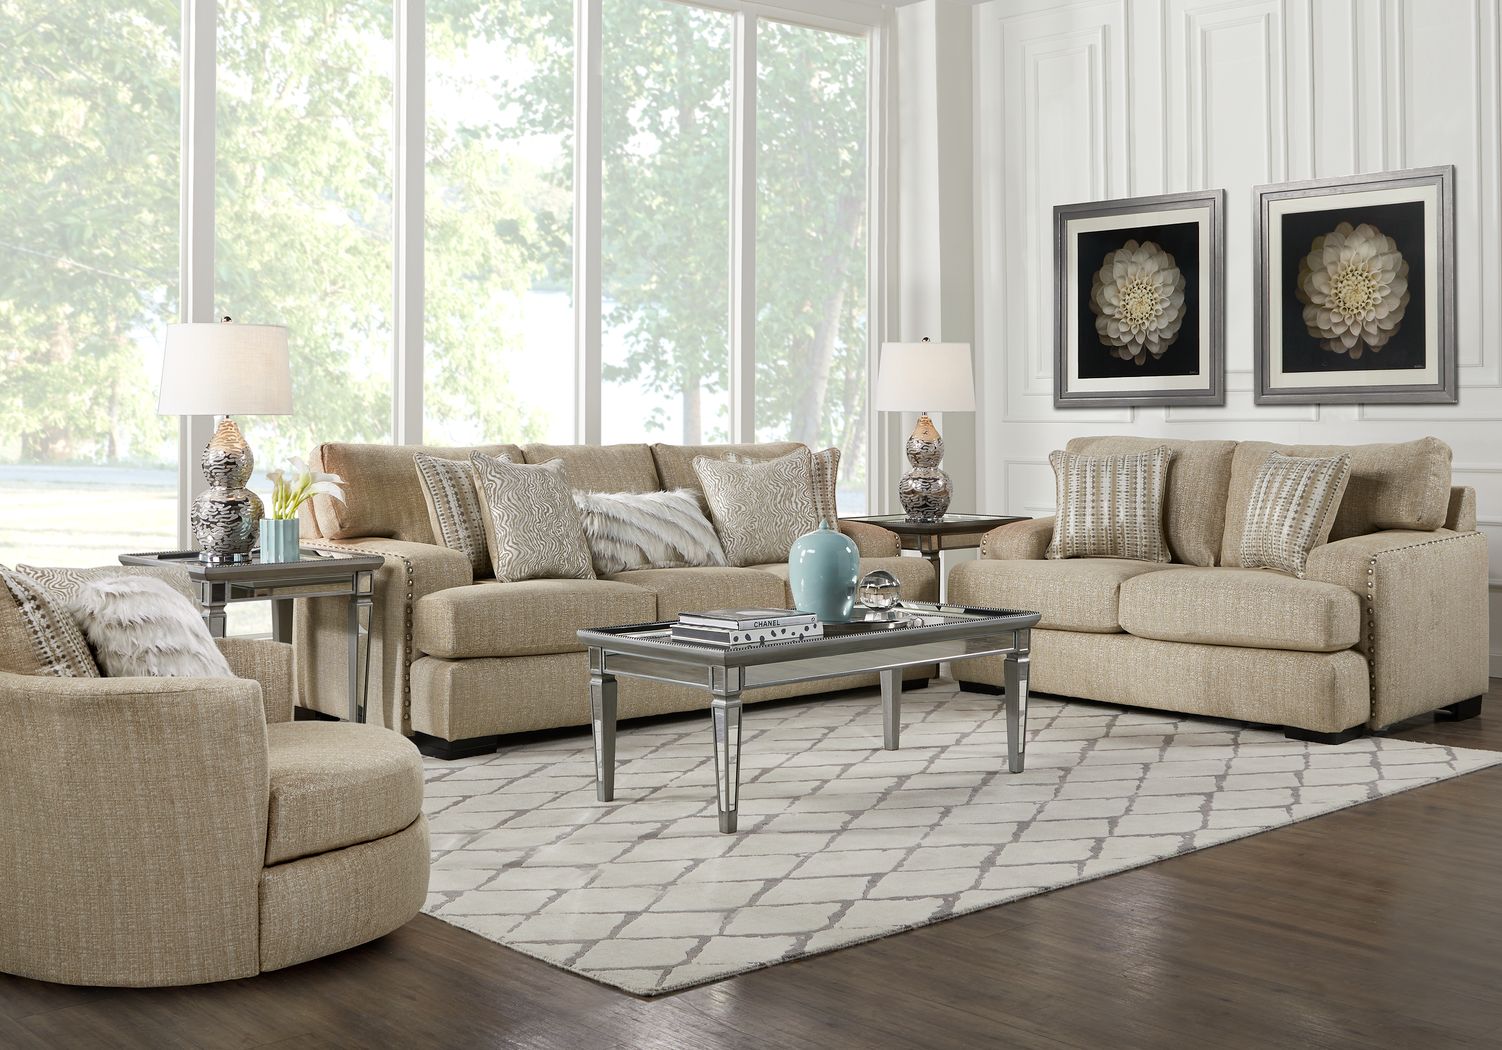 Thessaly Beige 2 Pc Living Room - Rooms To Go